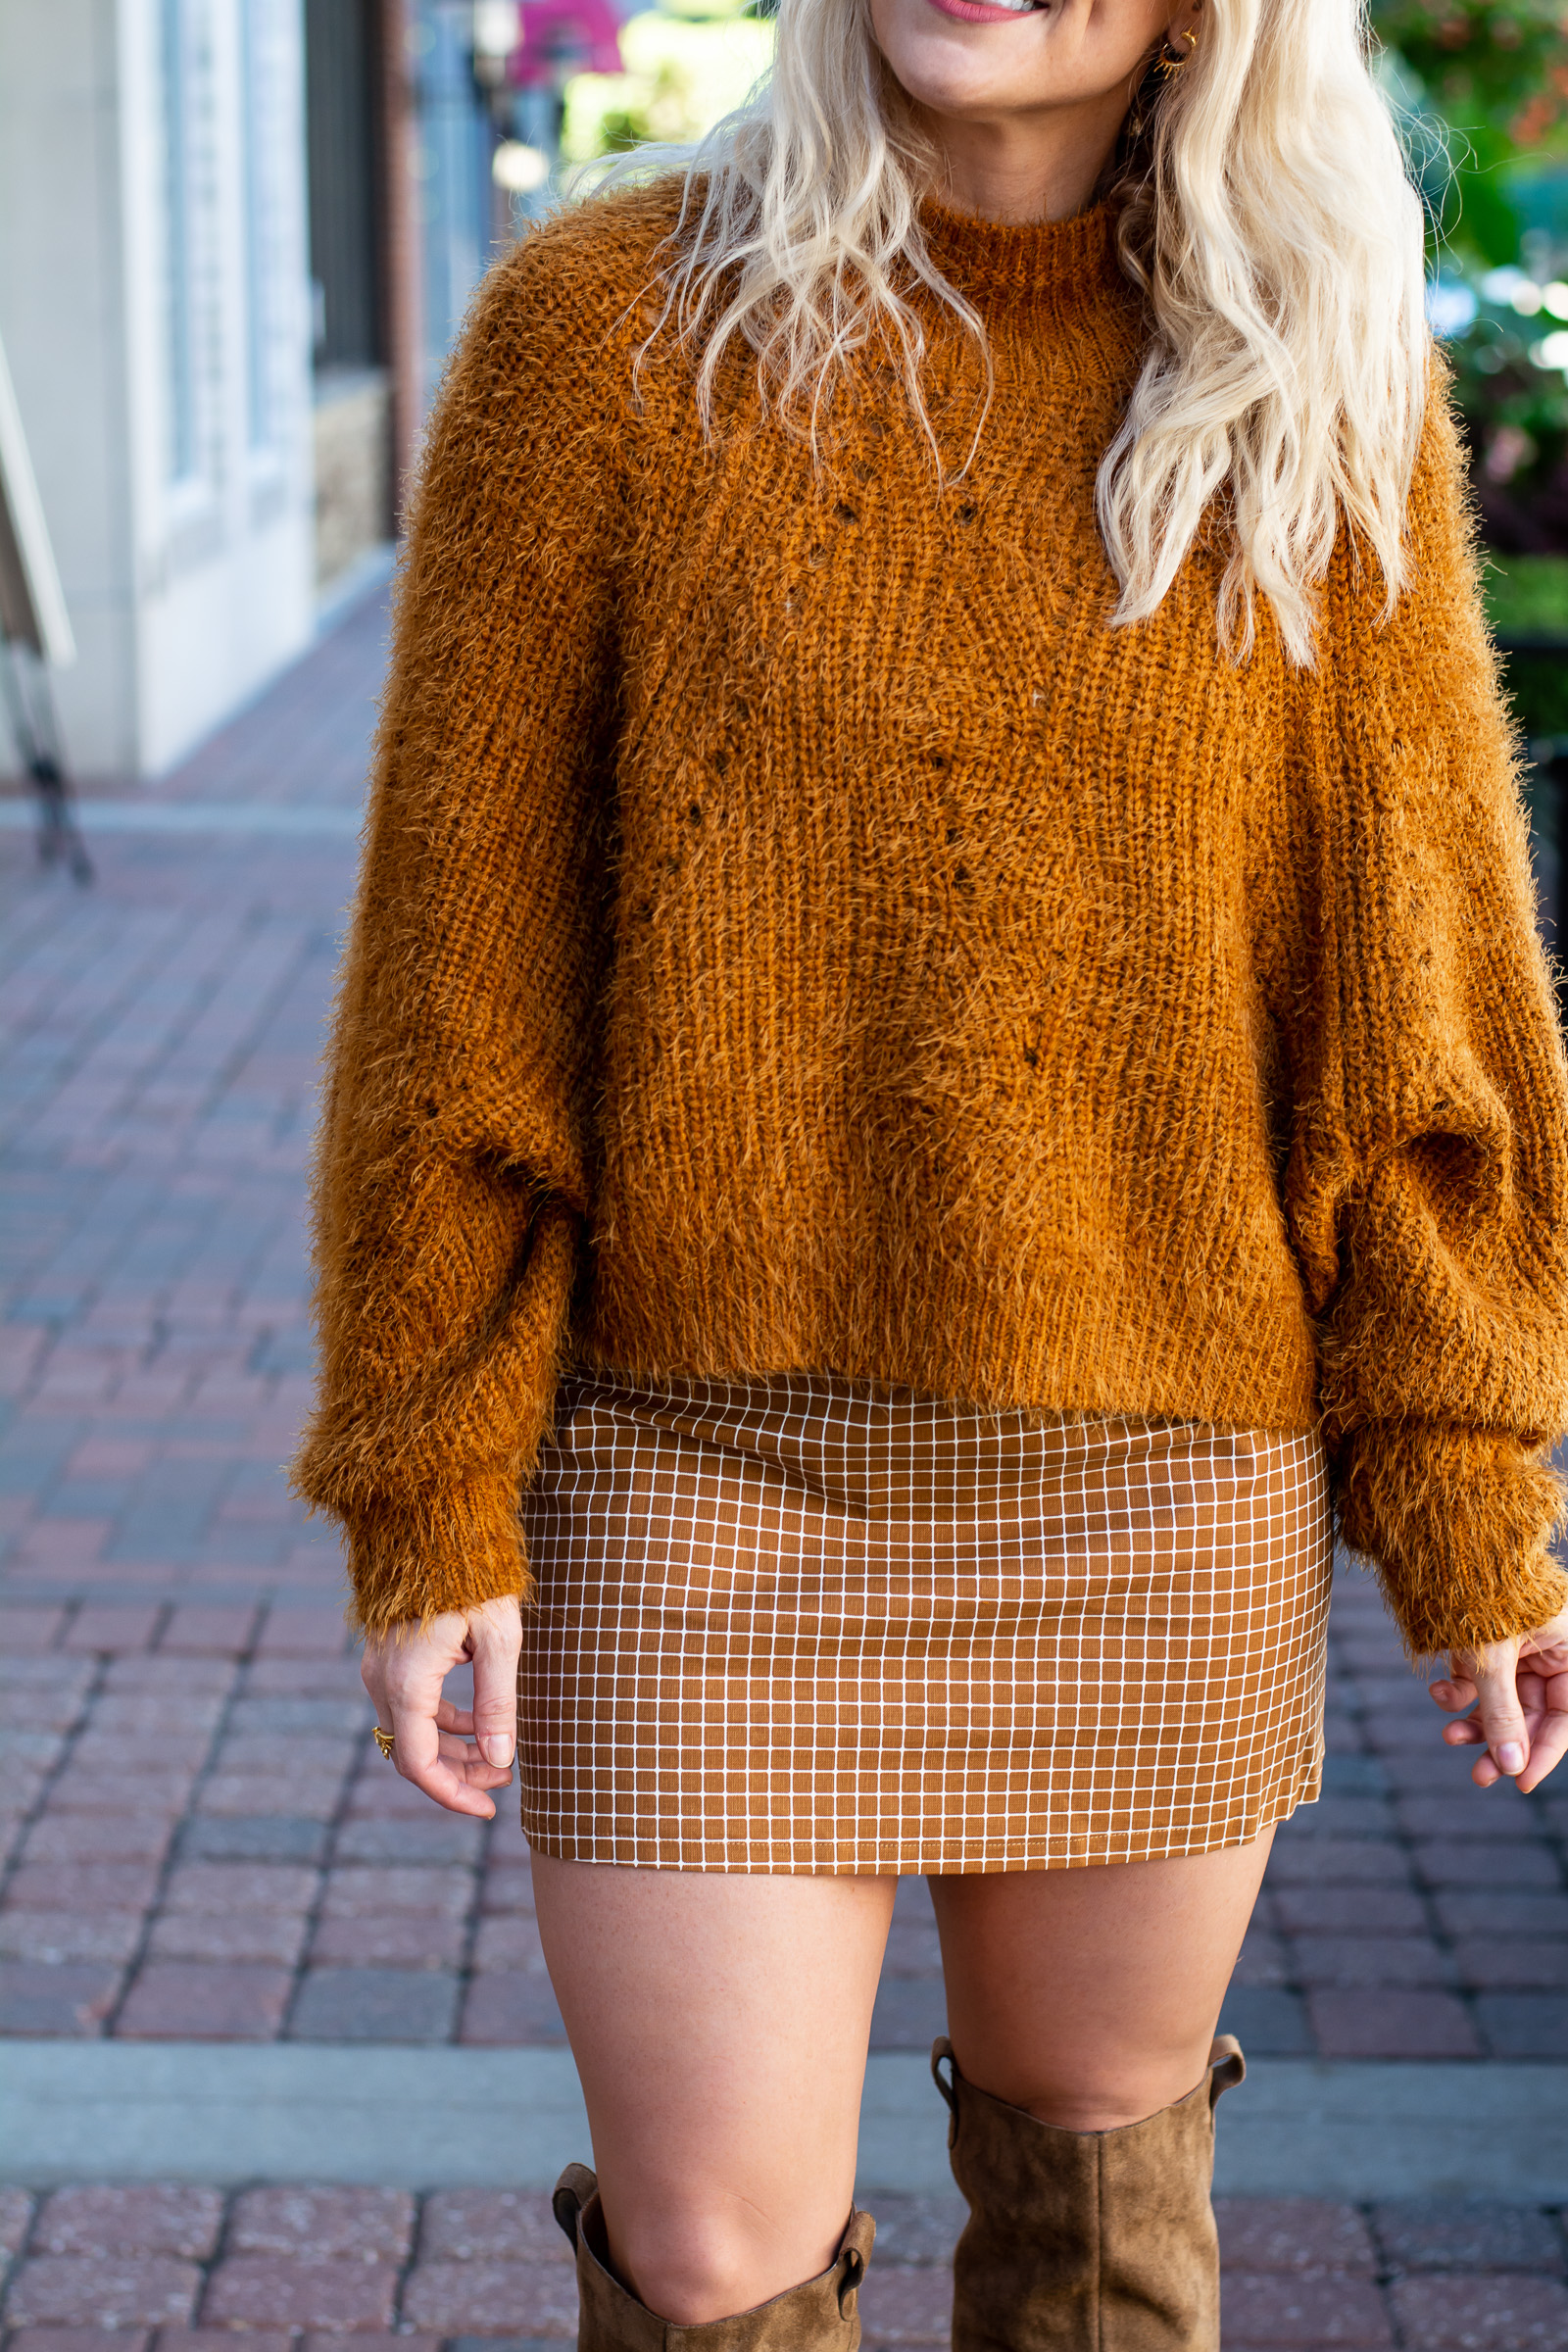 Pumpkin Spice with Ruby Rouge + Kindred Shops. | Le Stylo Rouge